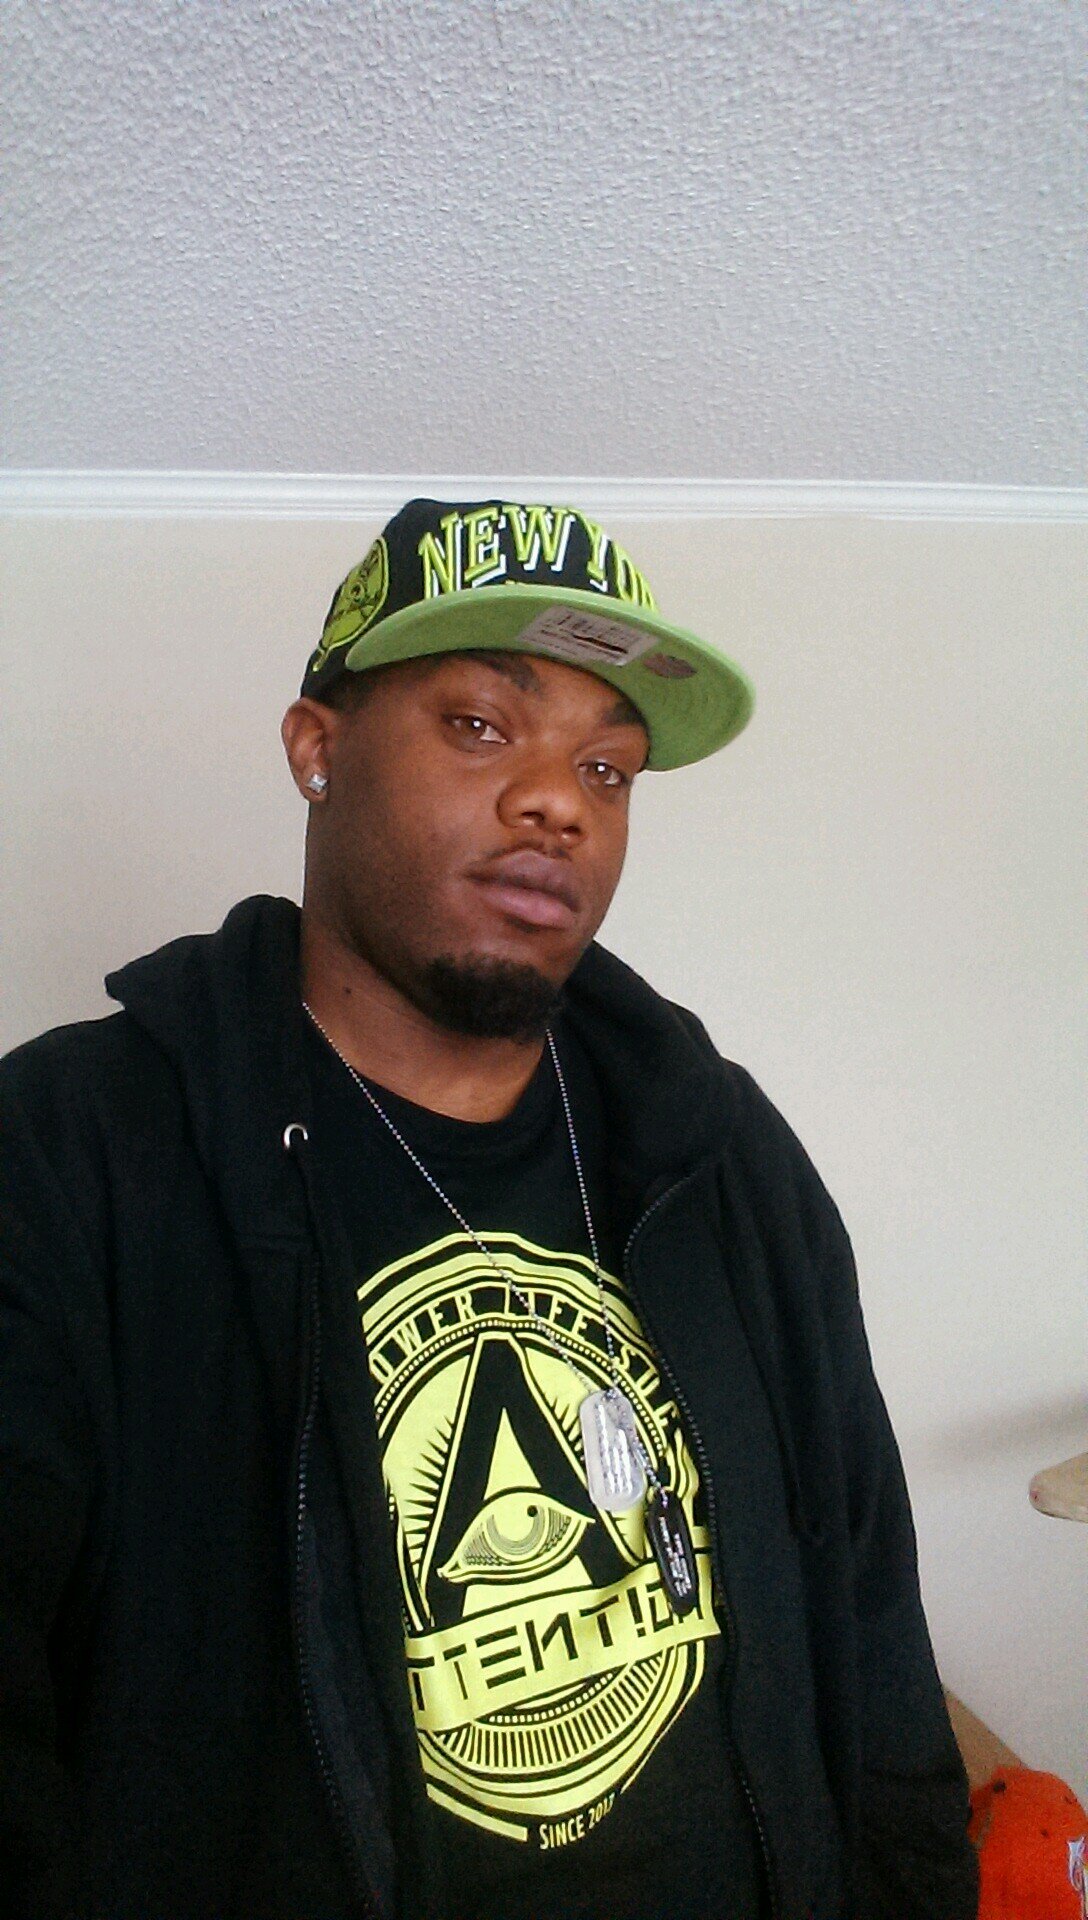 barber/ CEO and cofounder of attention clothing co. father of 1